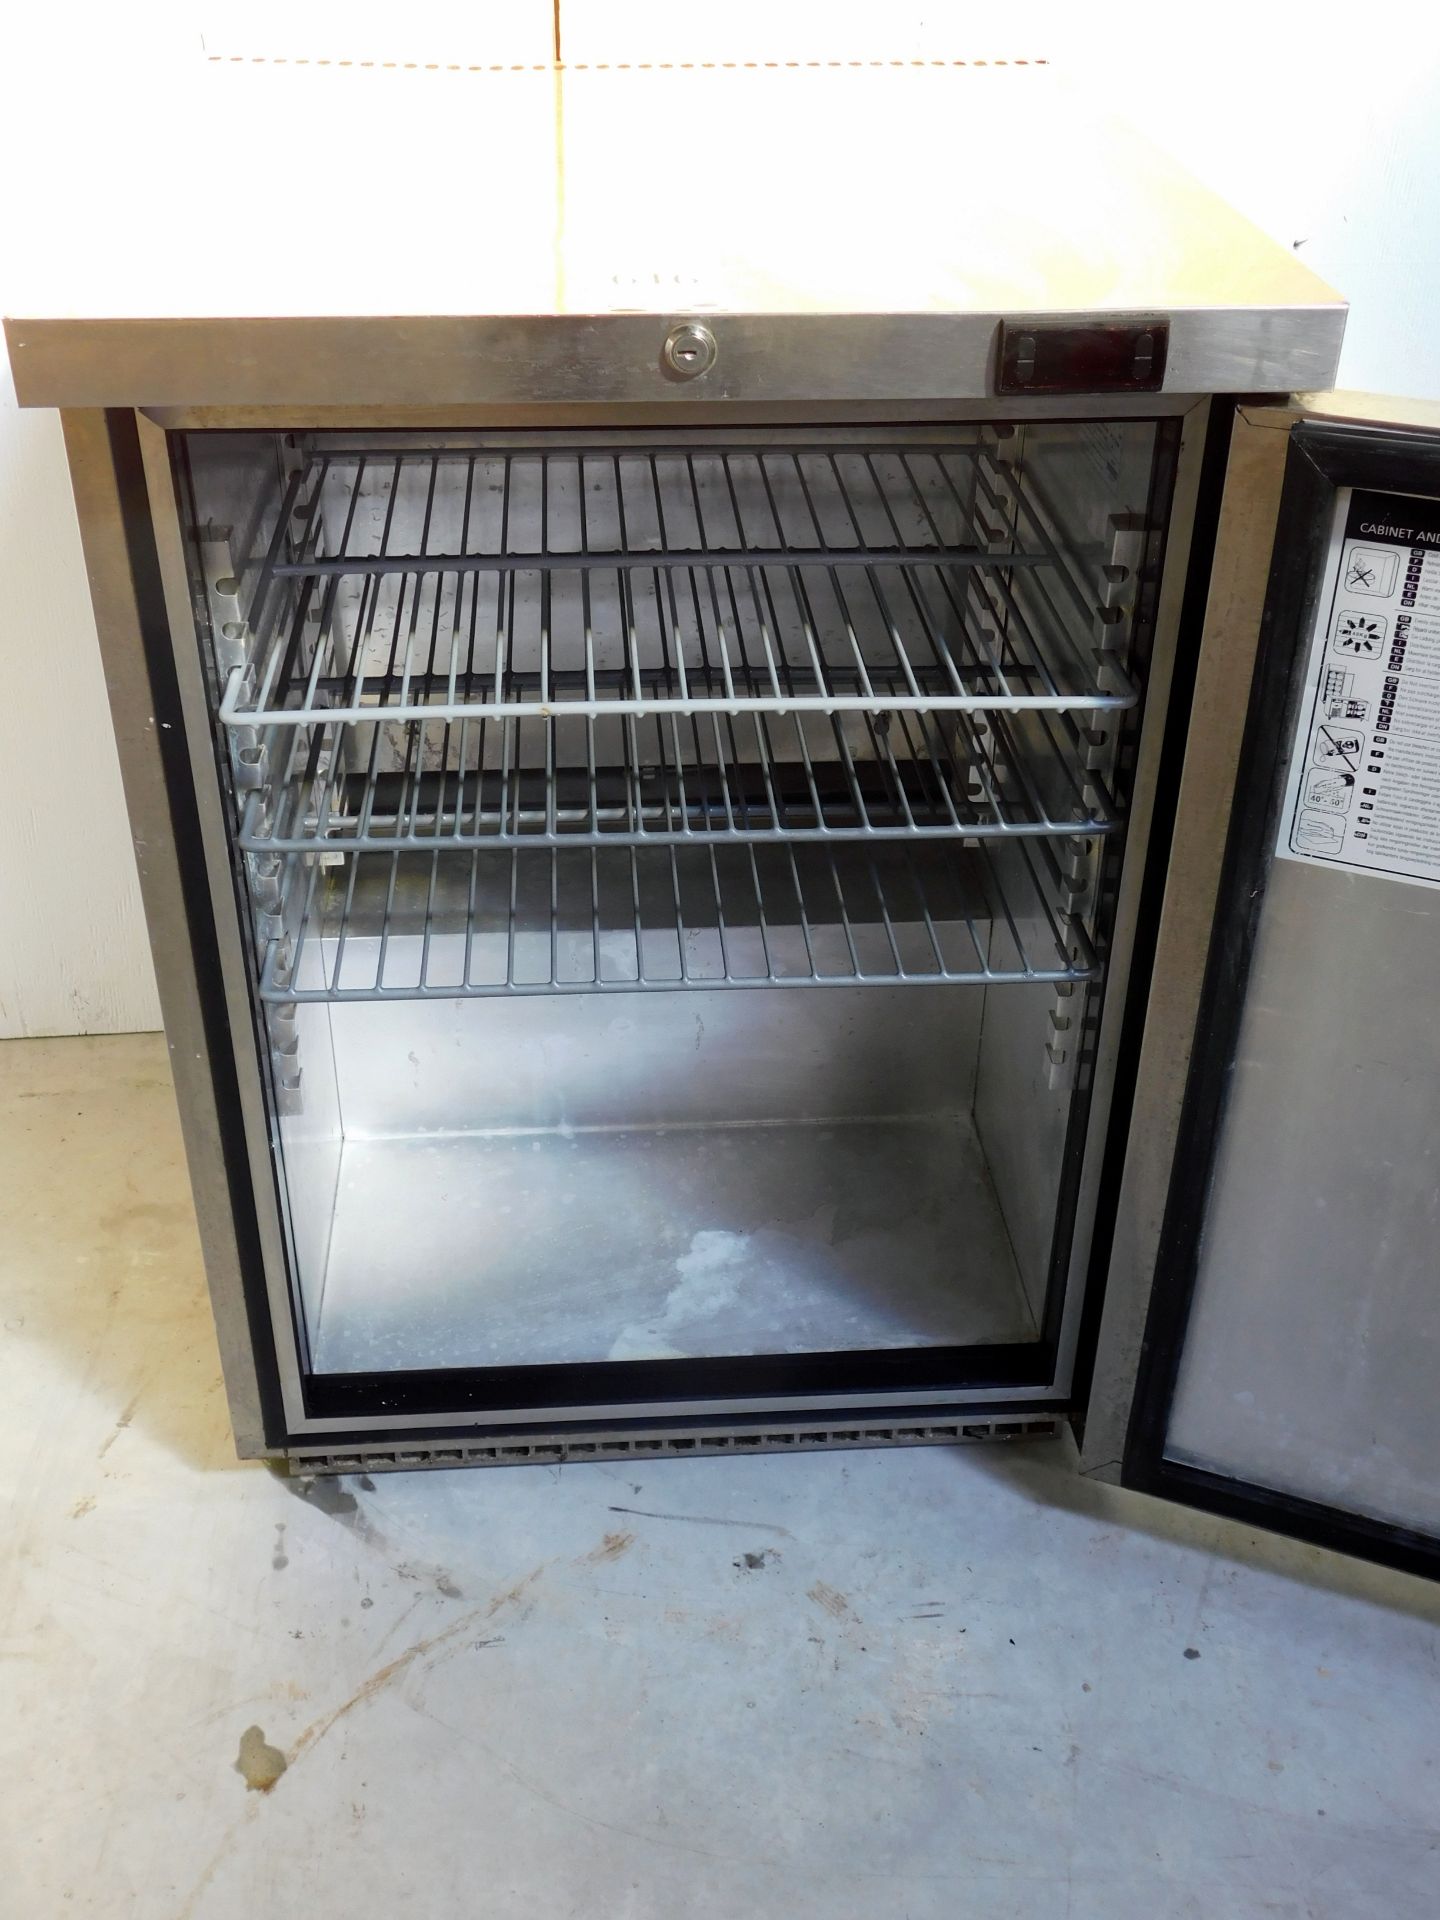 Foster HR150 Stainless Steel Single Door Undercounter Refrigerator, S/N: E5278477 (Located - Image 2 of 2